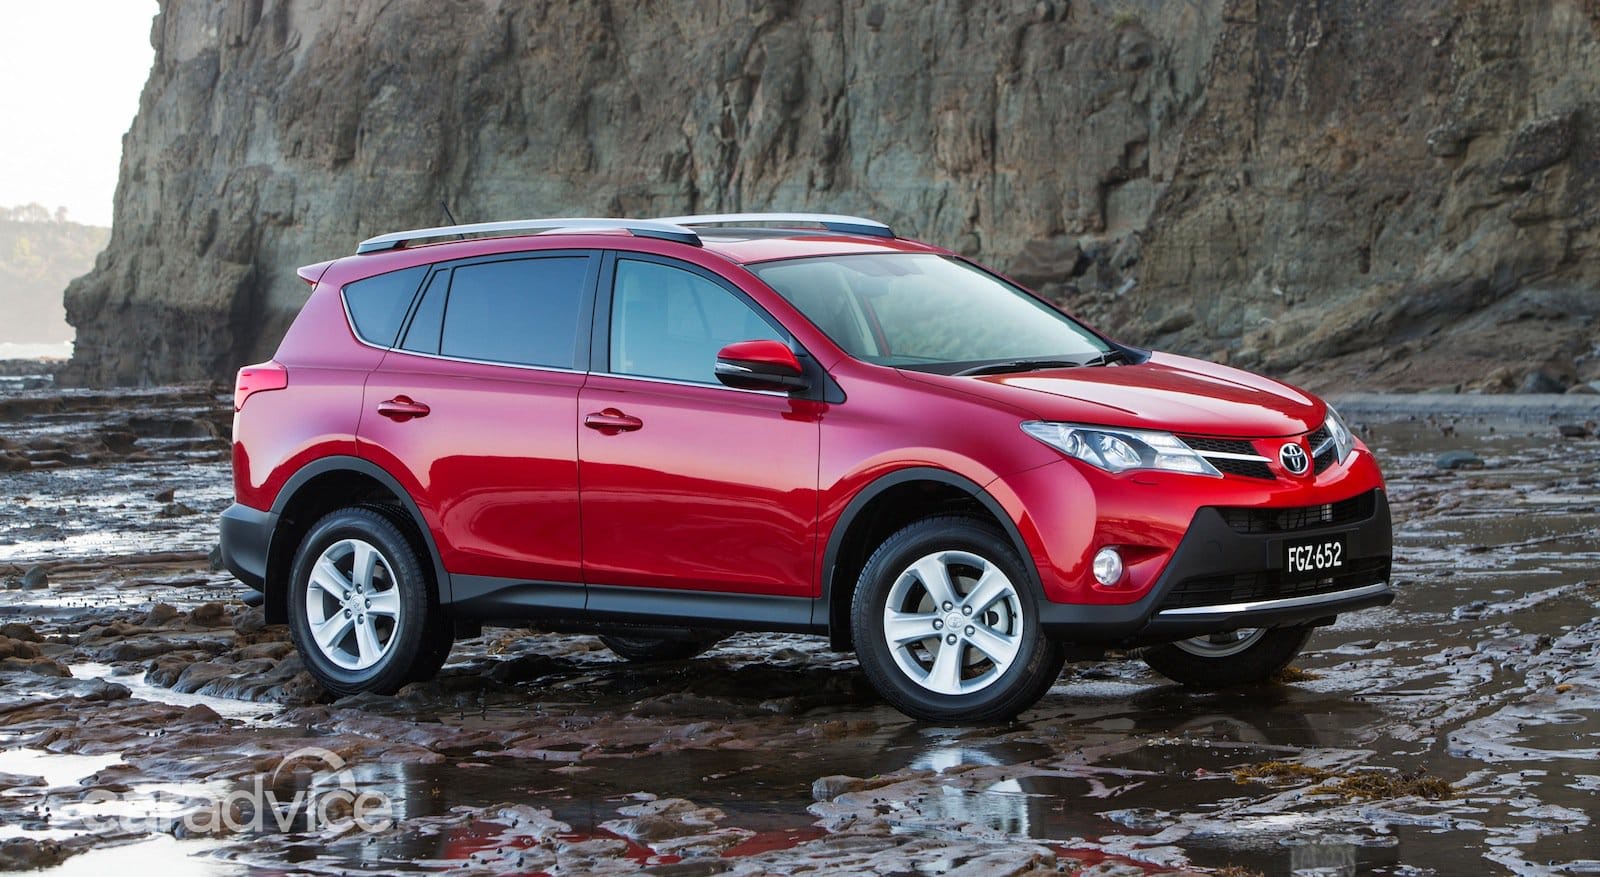 Toyota RAV4 diesel towing capacity doubled CarAdvice